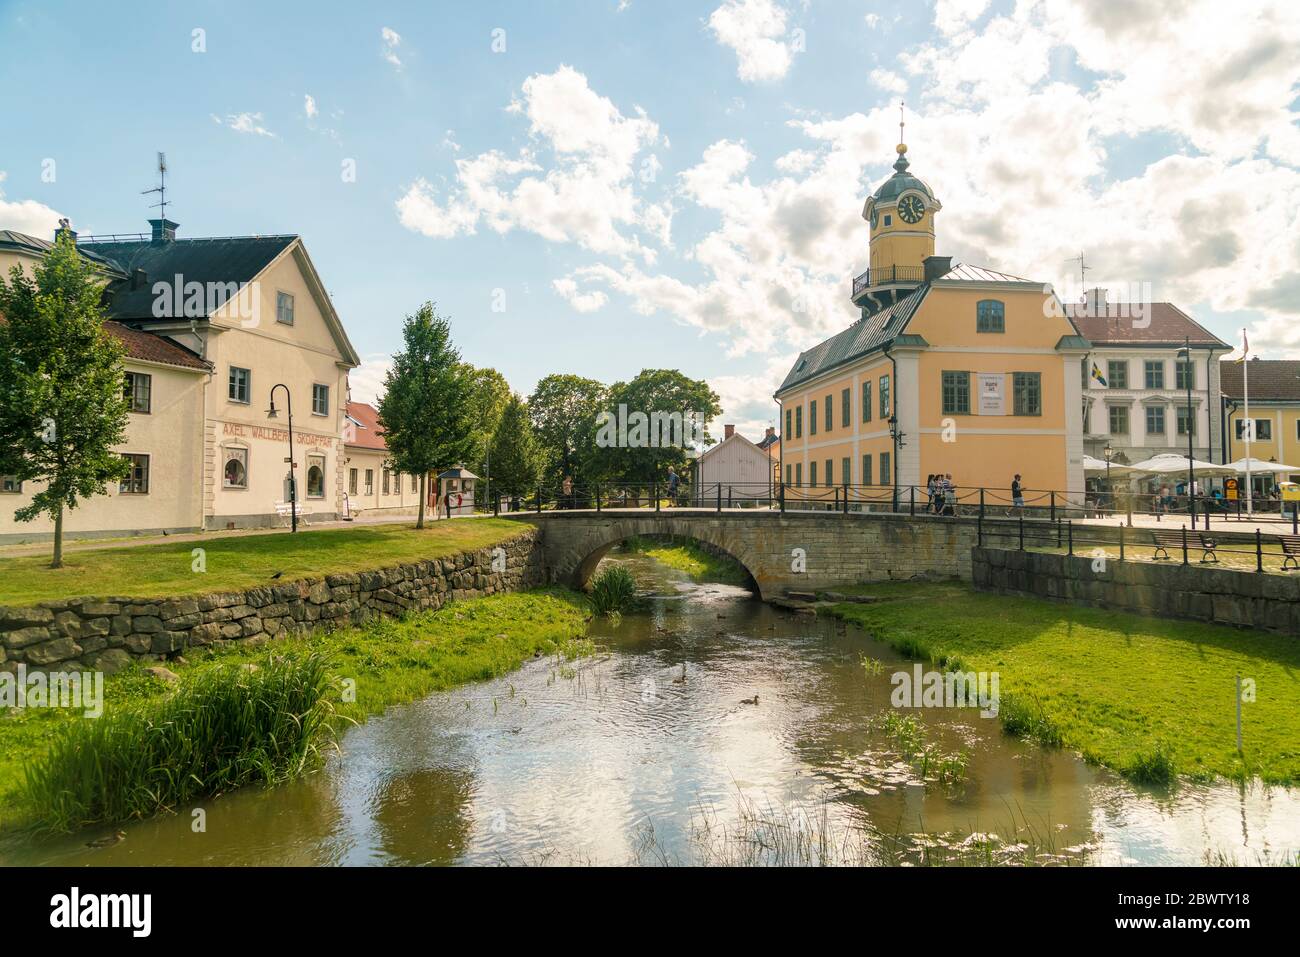 Sweden, Ostergotland, Soderkoping, Arch bridge over small city canal with town hall in background Stock Photo